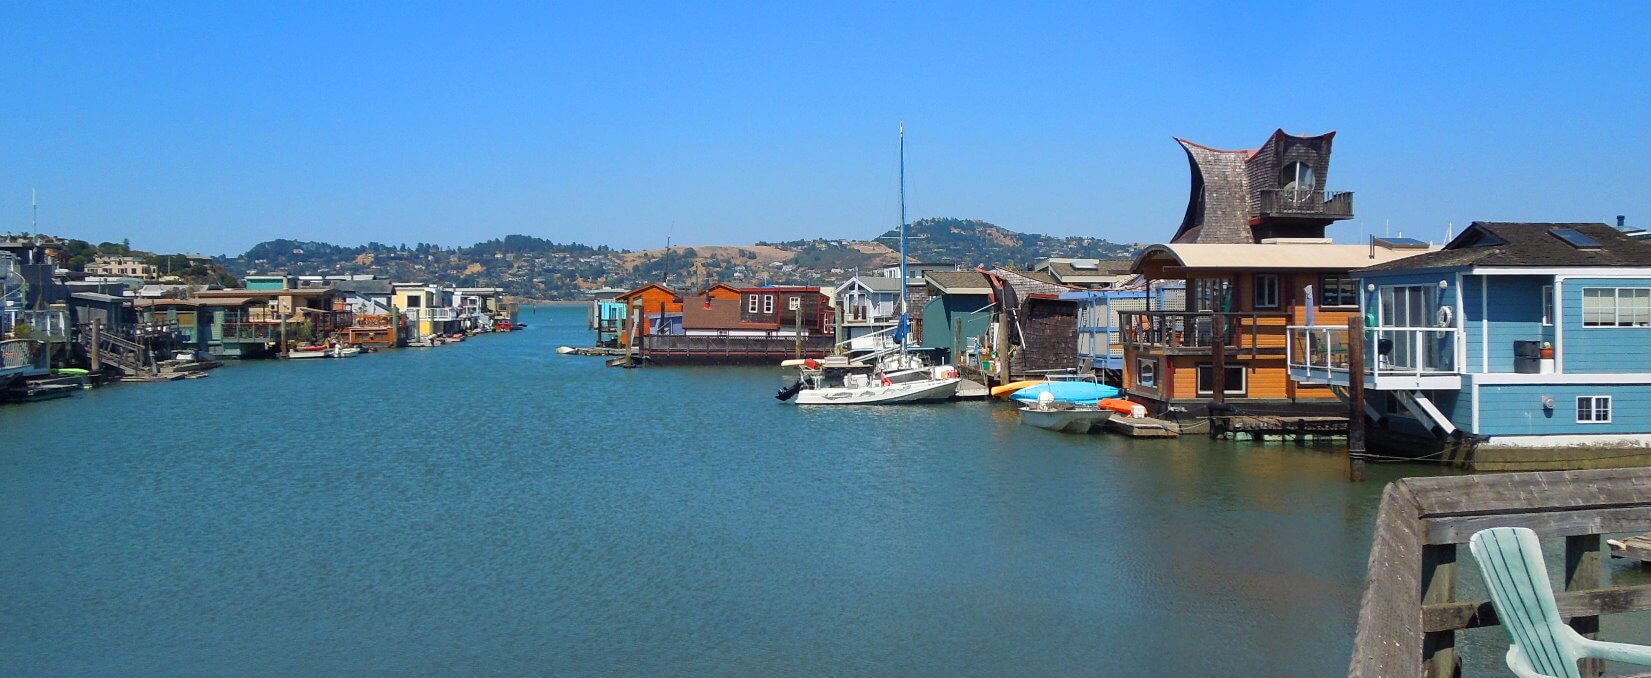 sausalito_house_boats_floating_homes_guided_tour_from_san_francisco_trip_advisor